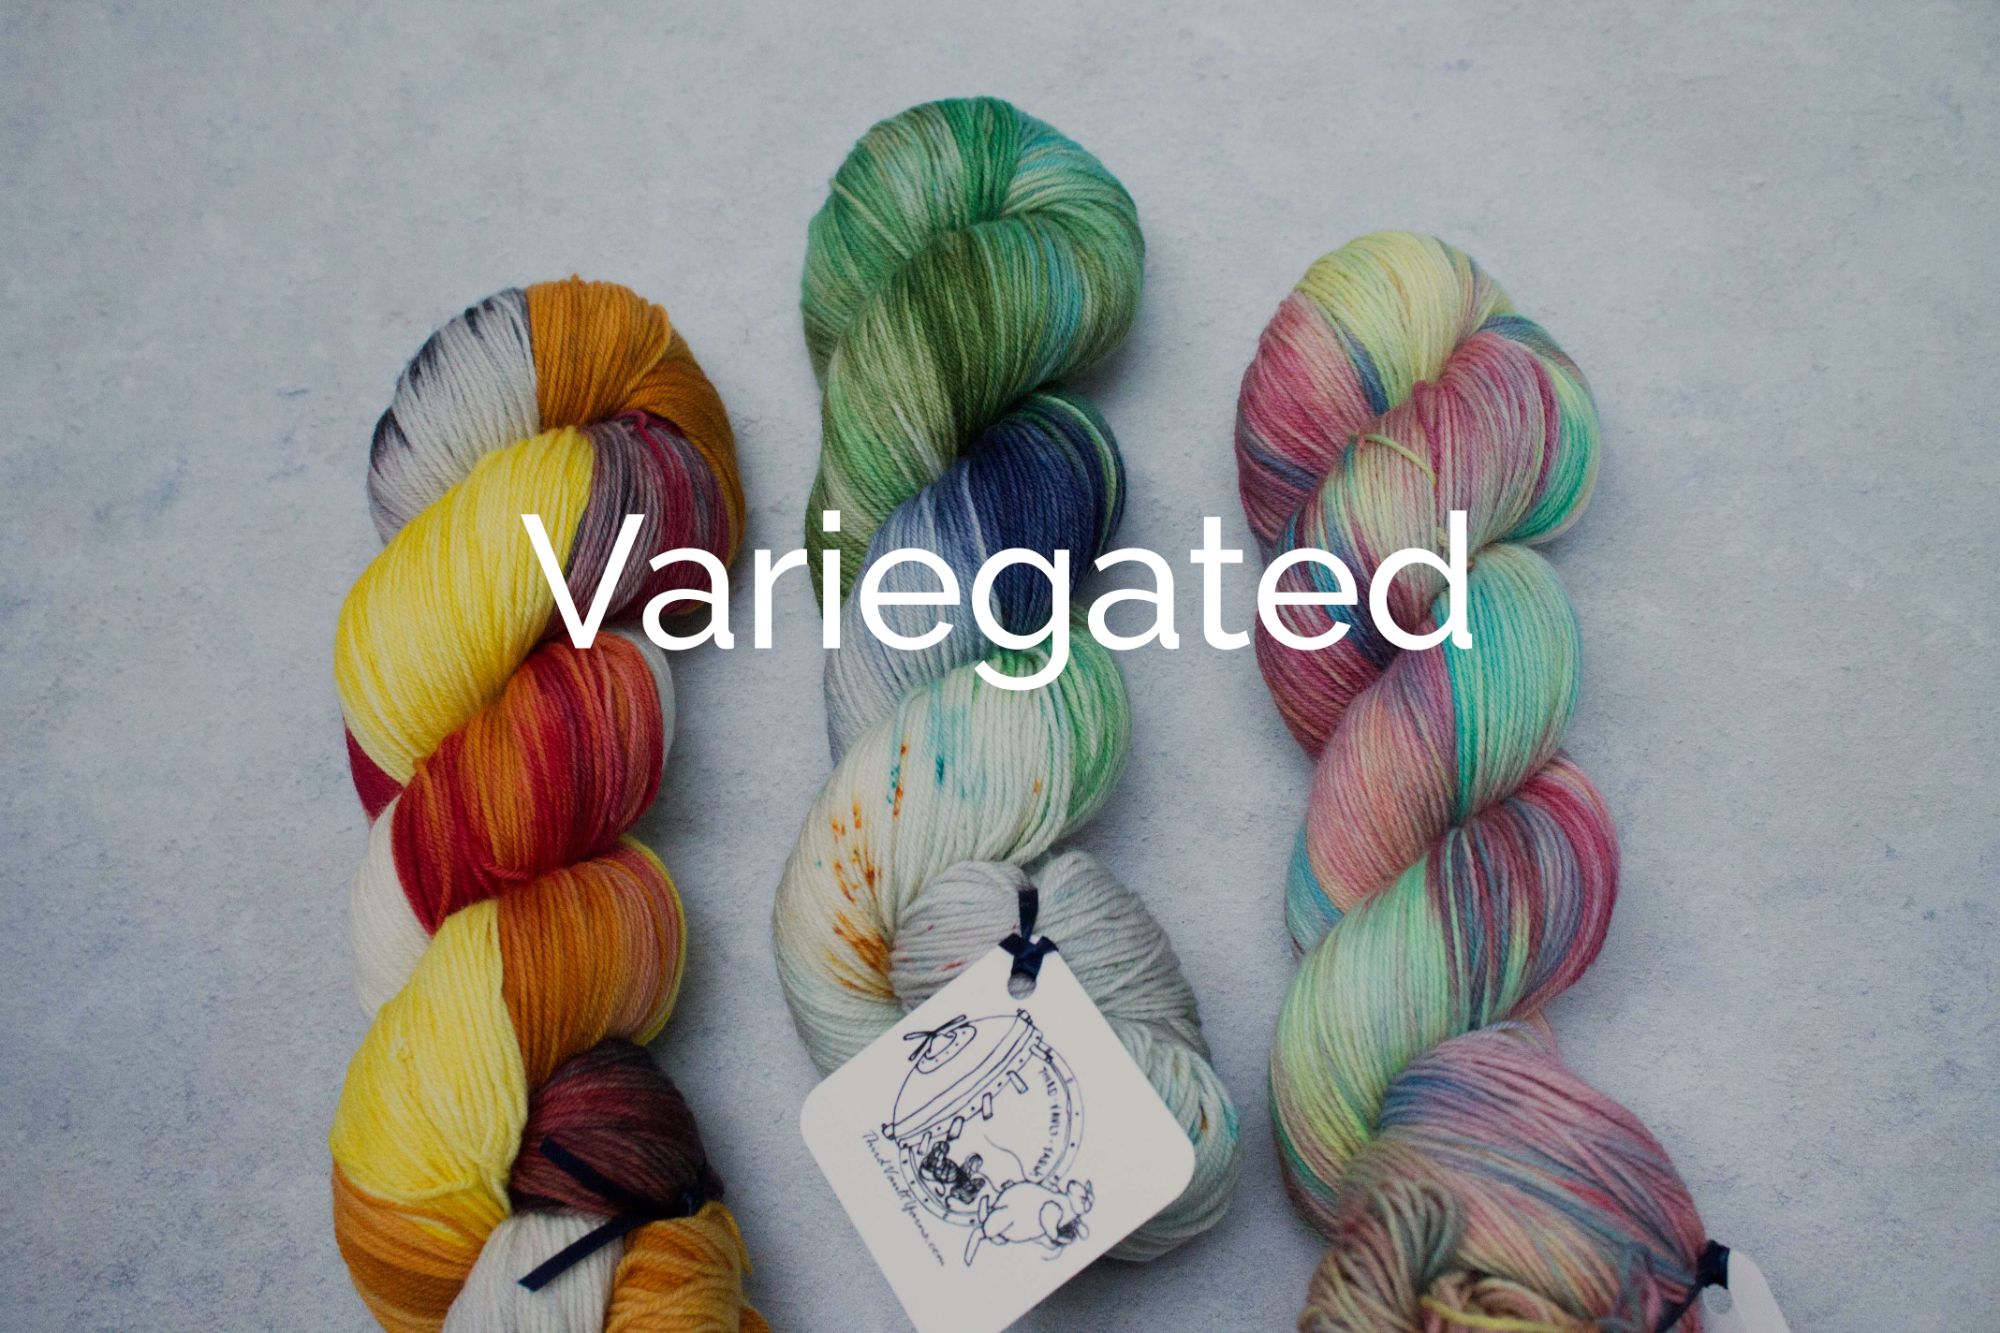 Check out the Variegated yarns section of the shop